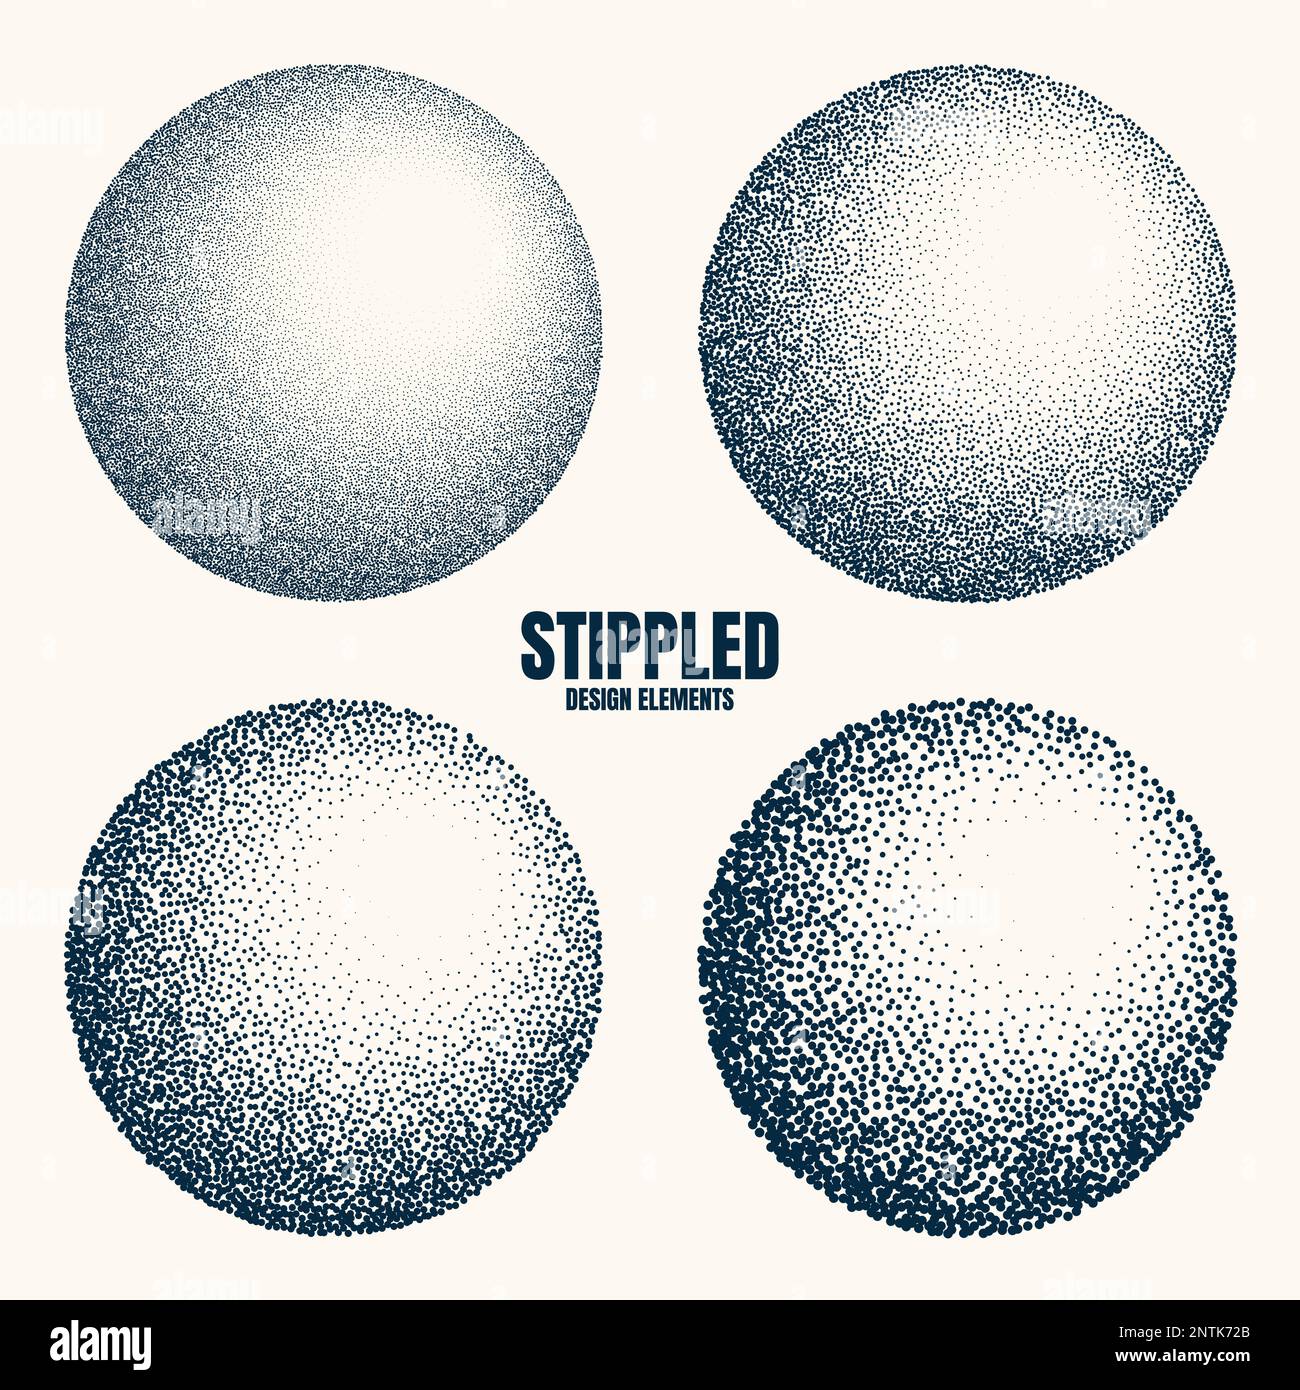 Round shaped dotted objects, vintage stipple elements. Fading